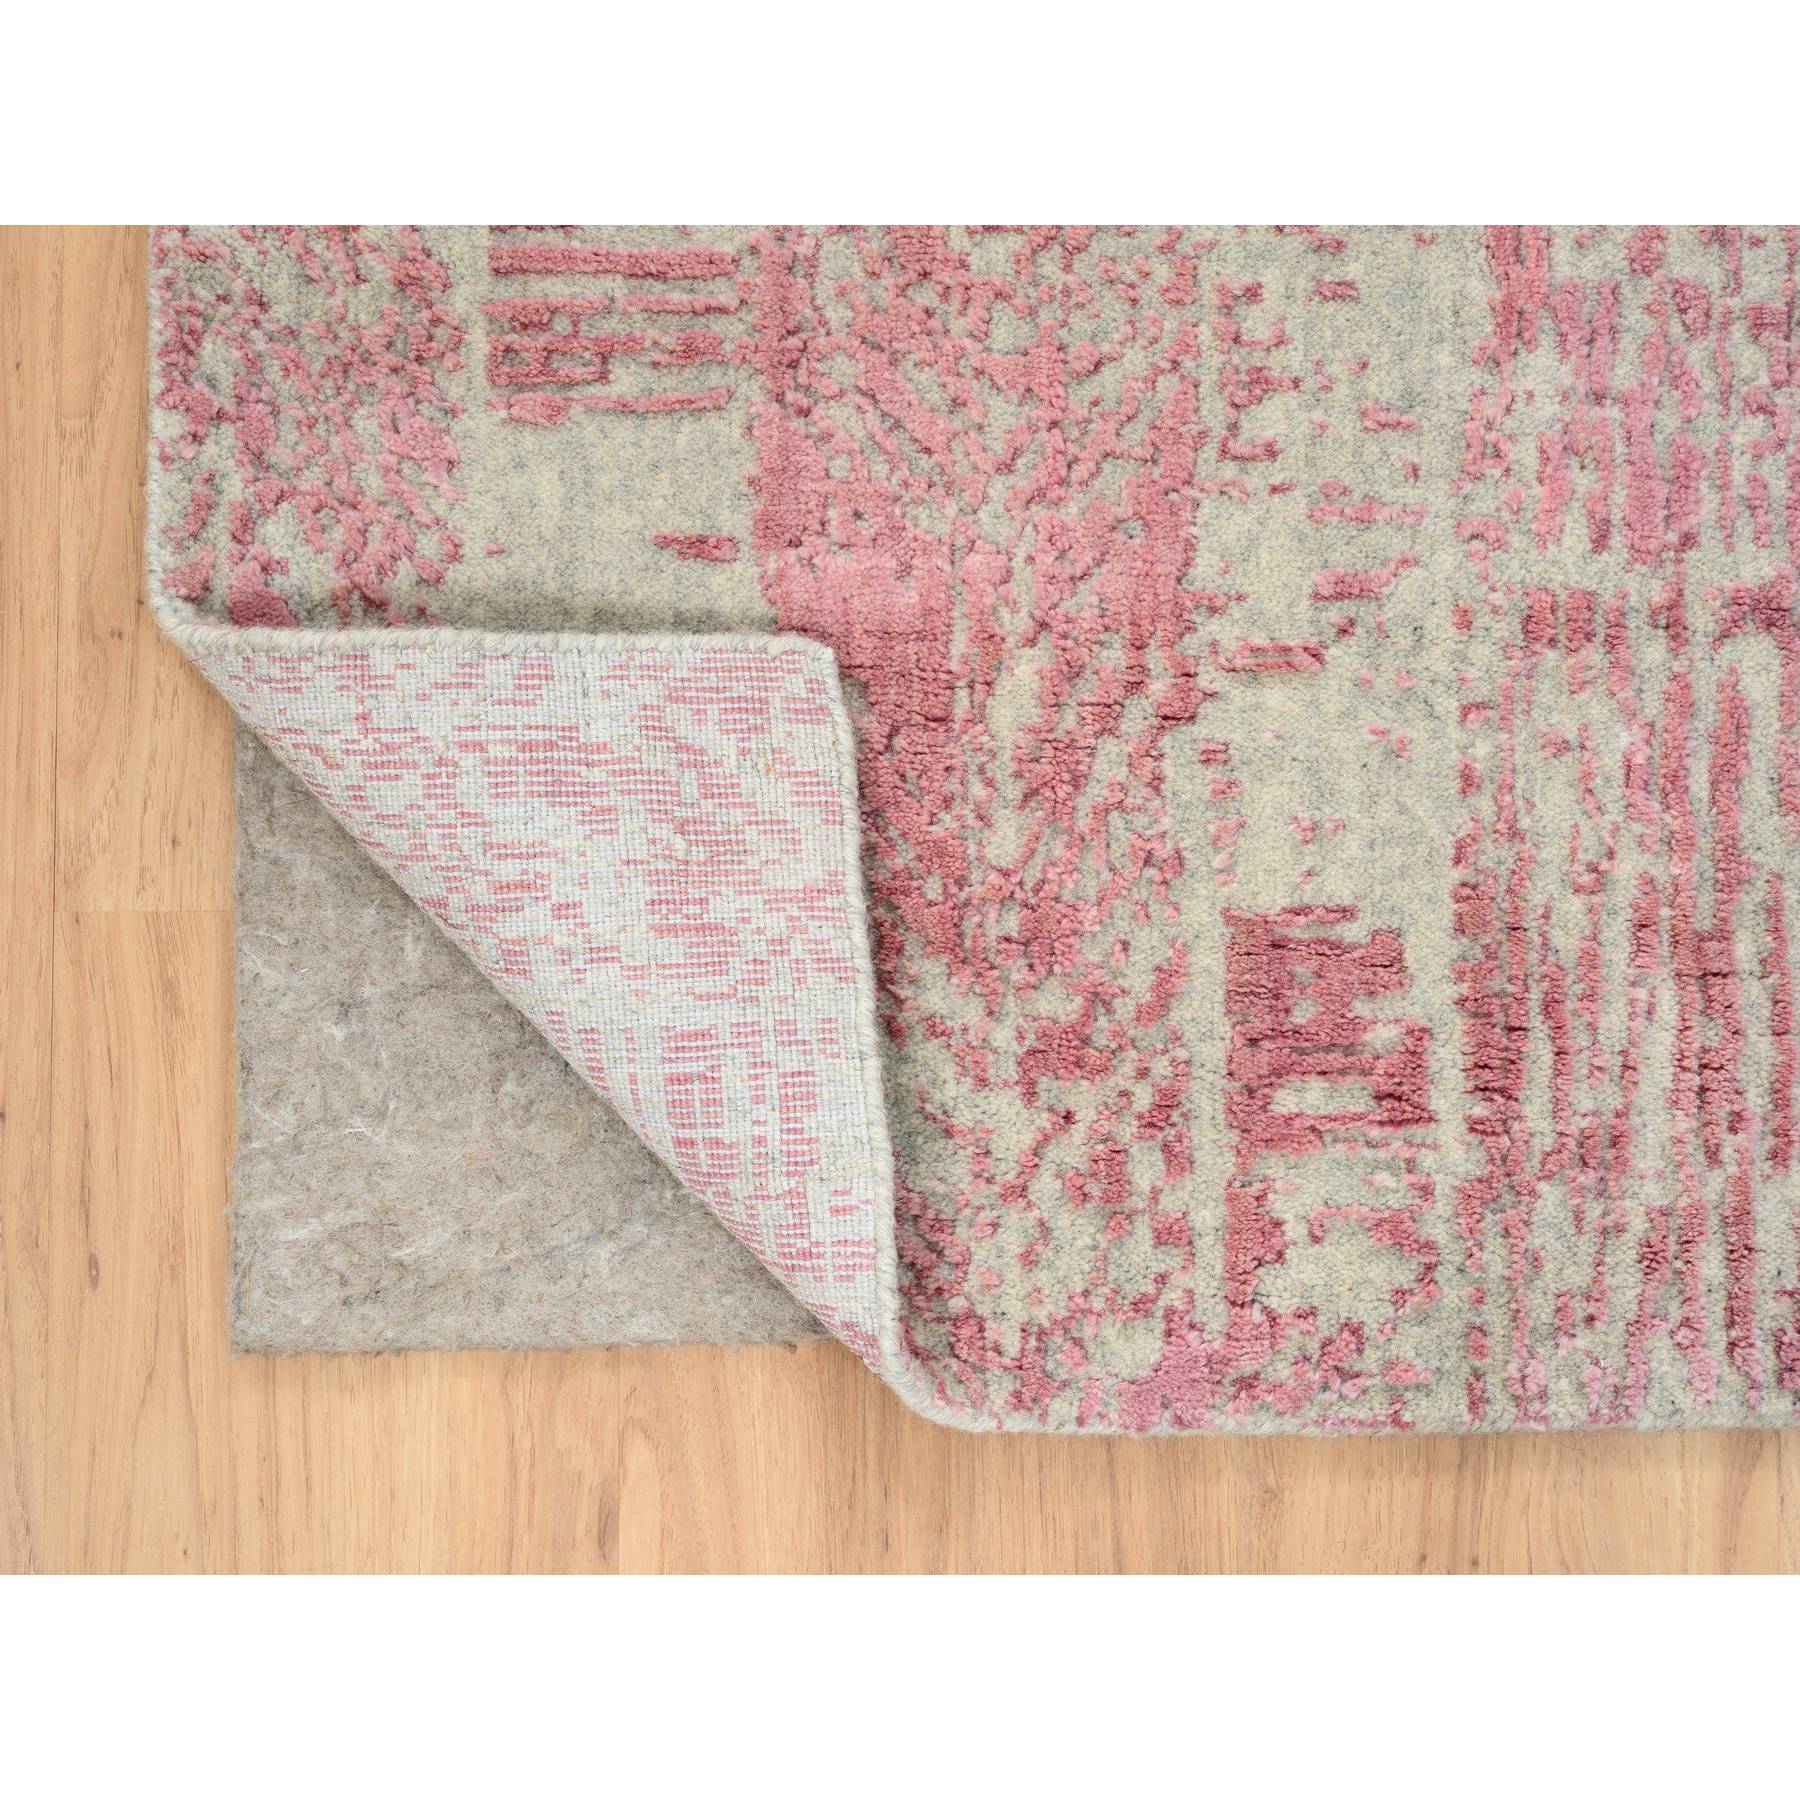 2'6"x8' Rose Pink, Jacquard Hand Loomed, All Over Design Wool and Art Silk, Runner Oriental Rug 